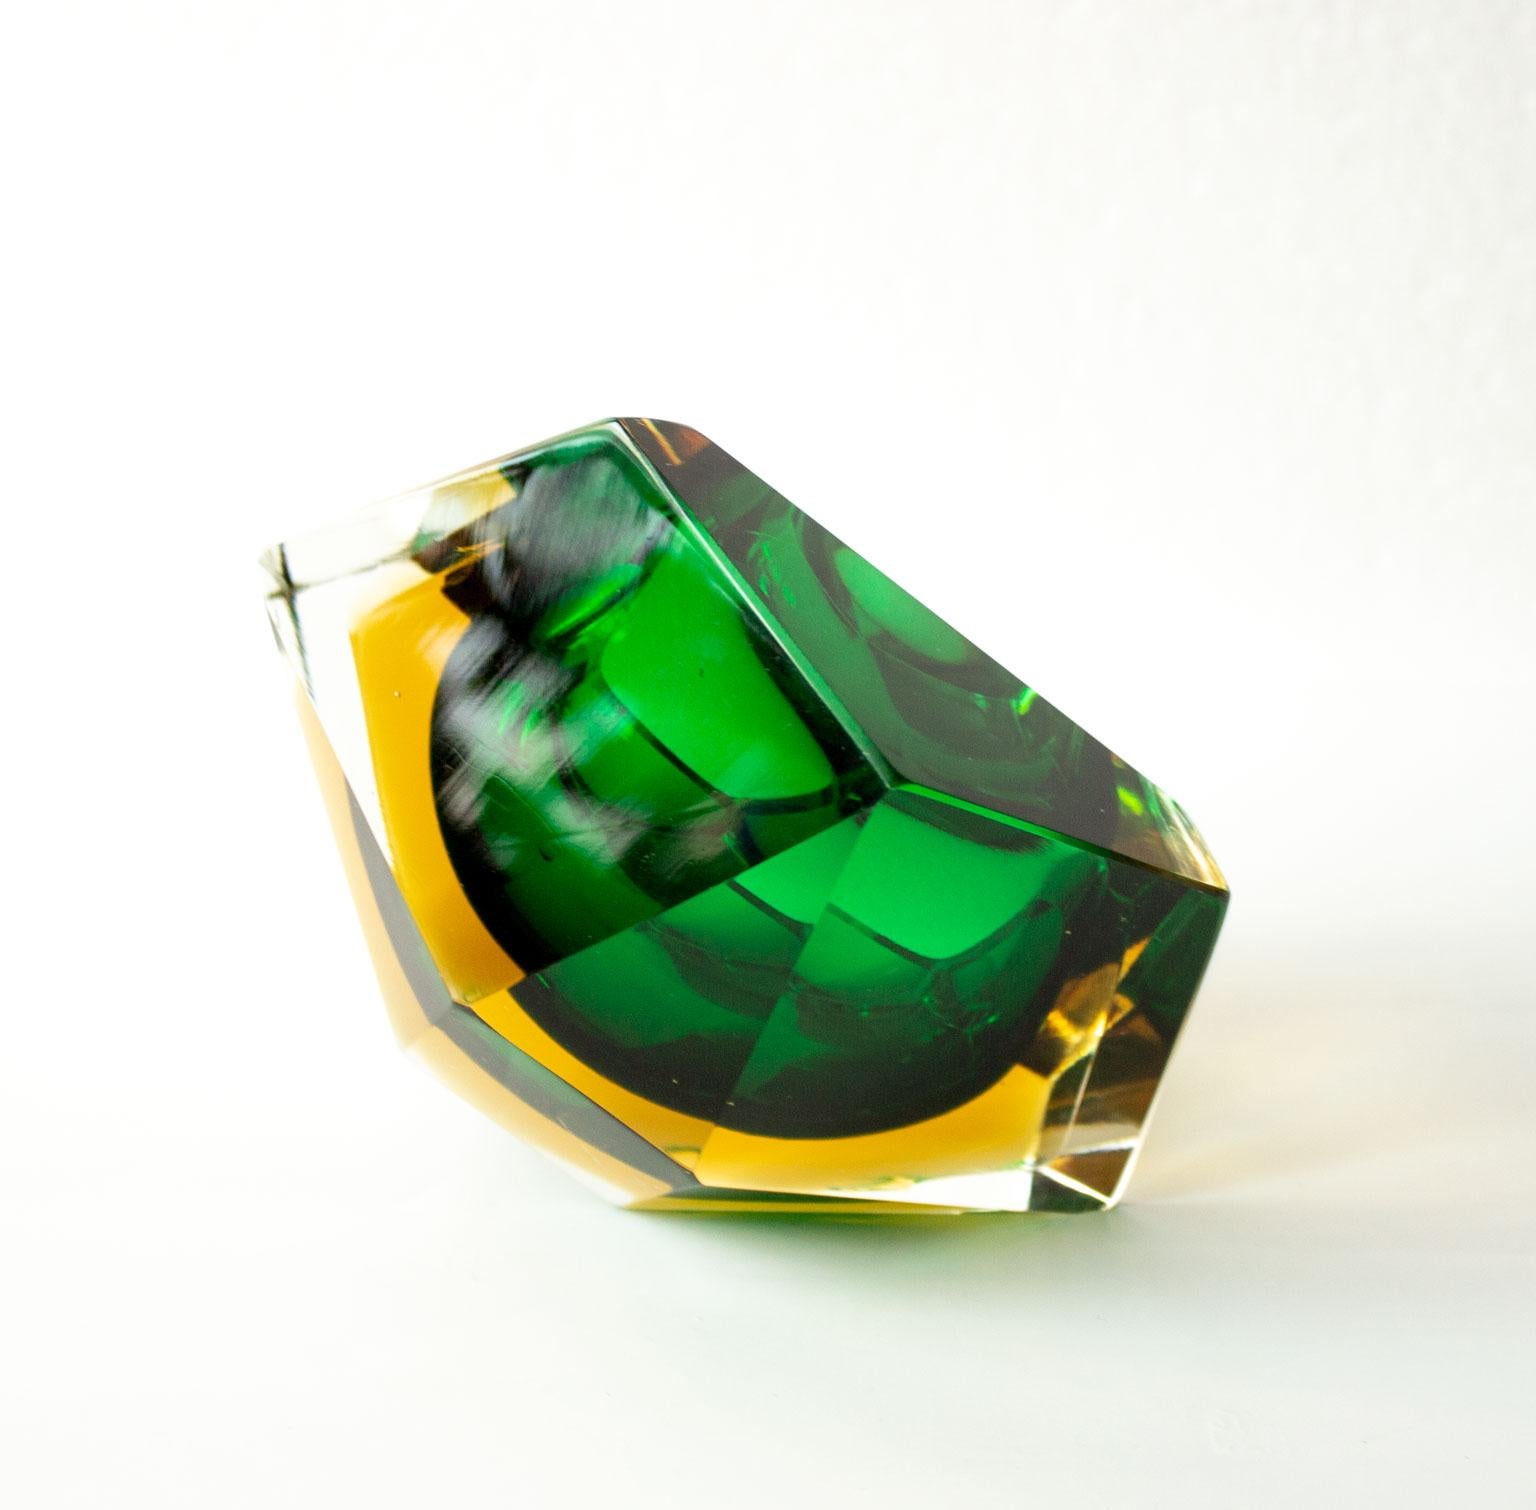 Faceted Mid-Century Modern Green Sommerso Murano Glass Bowl Attributed to Flavio Poli